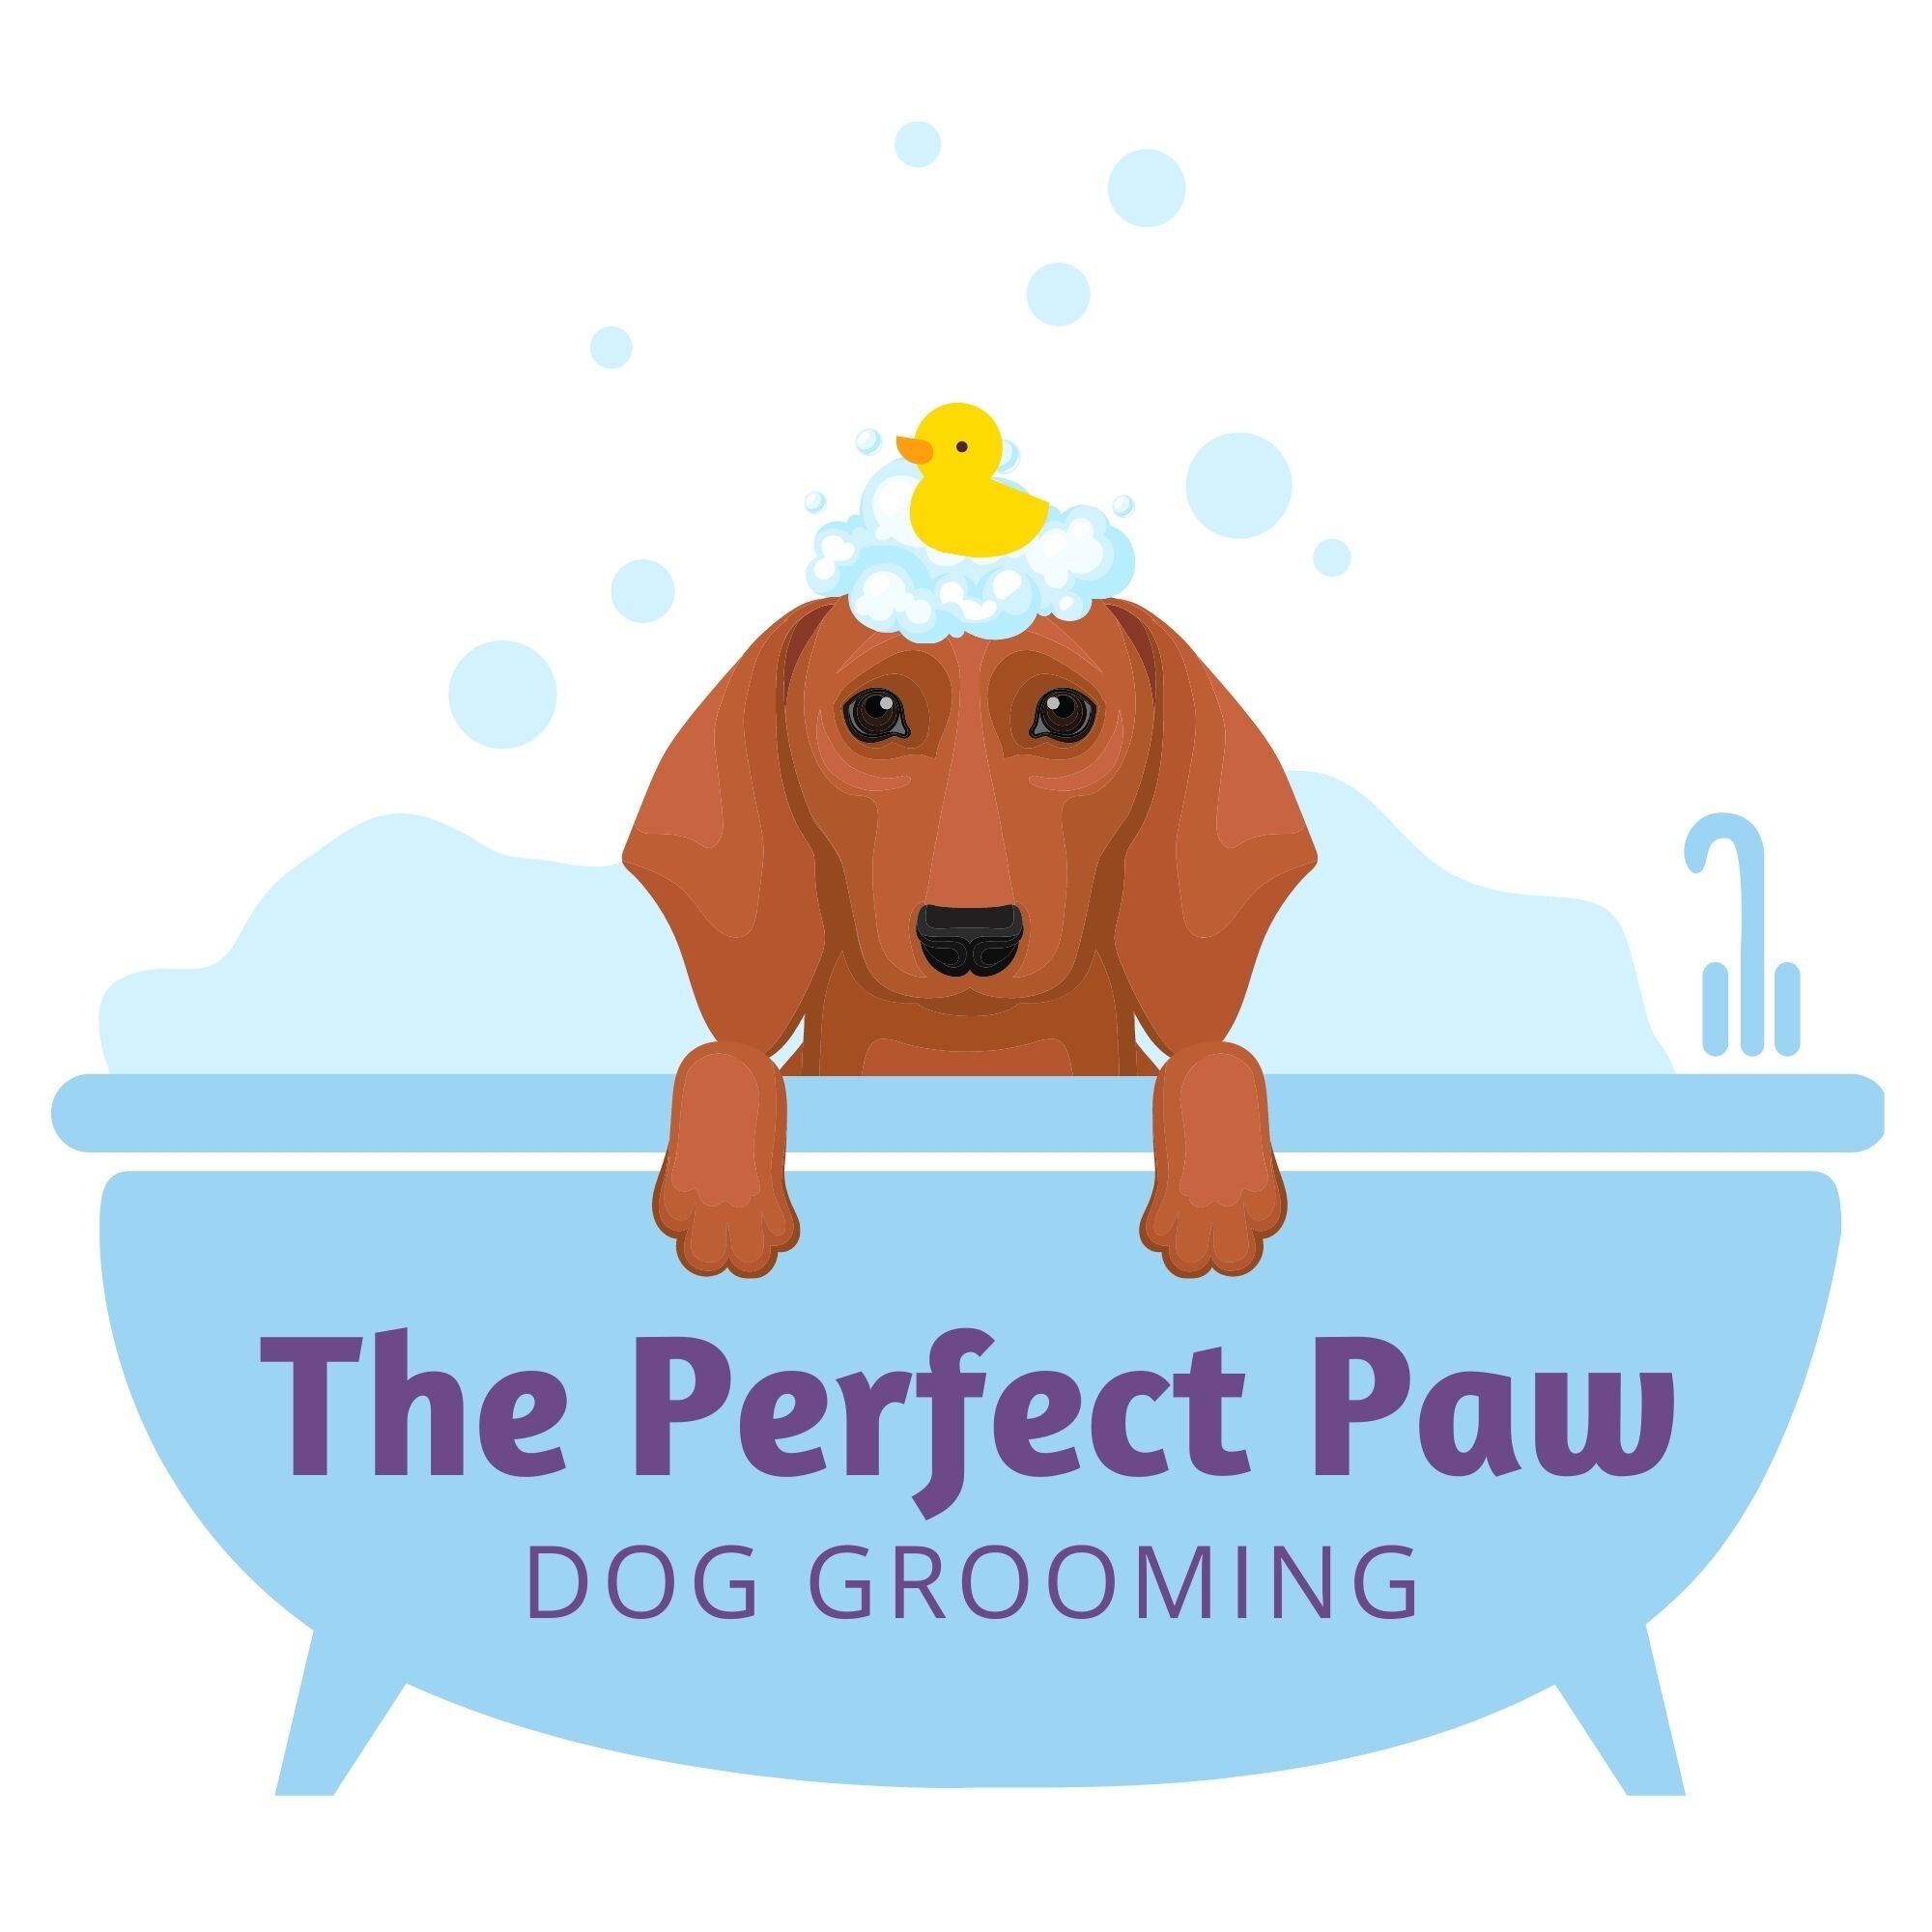 The Perfect Paw Dog Grooming, East Syracuse NY